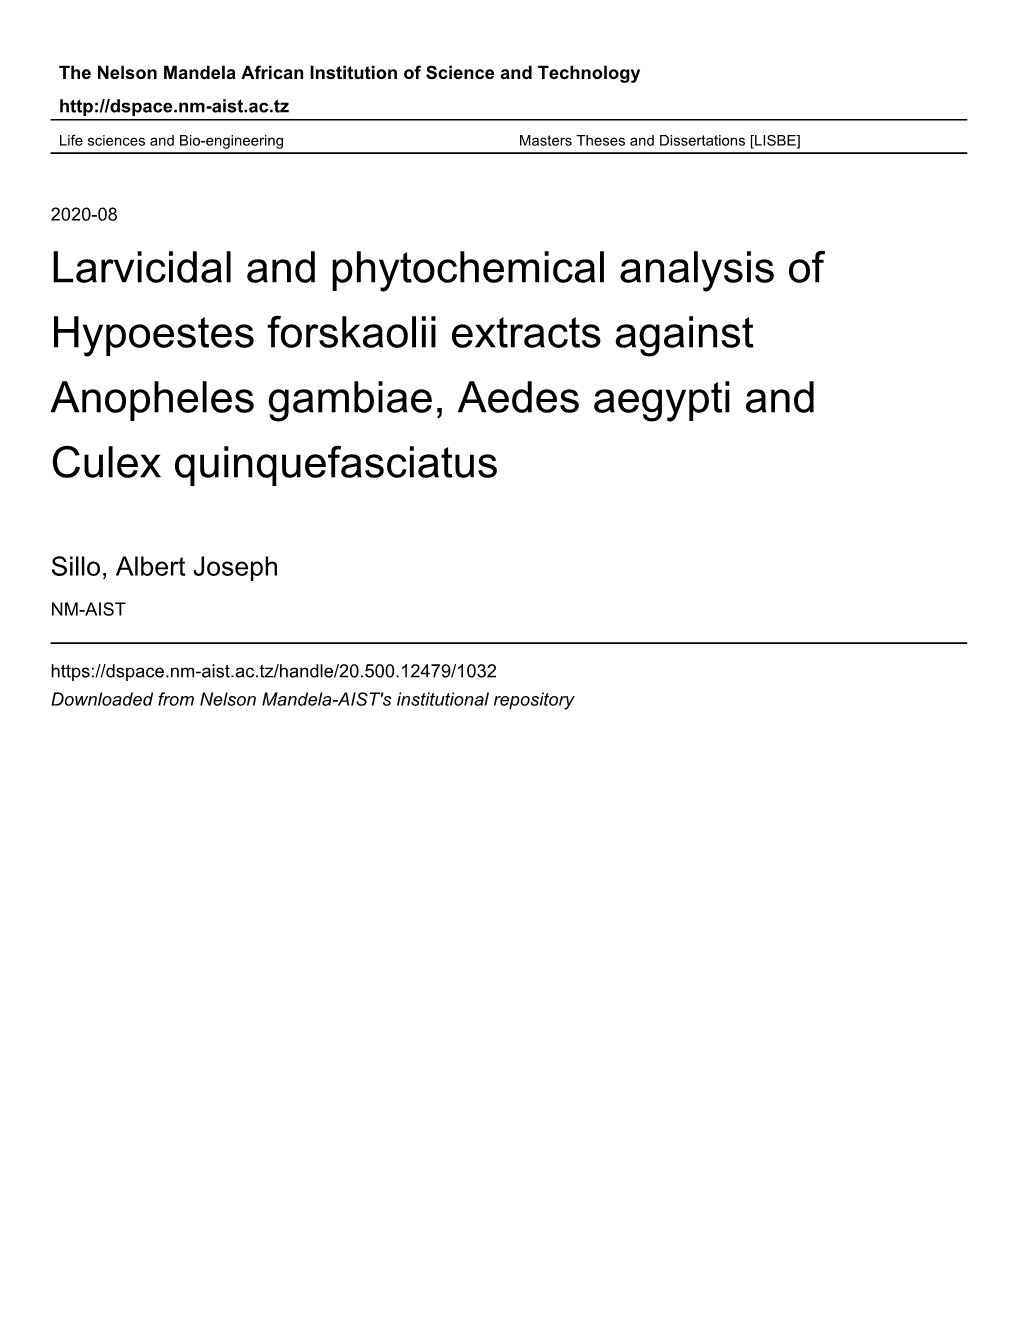 Larvicidal and Phytochemical Analysis of Hypoestes Forskaolii Extracts Against Anopheles Gambiae, Aedes Aegypti and Culex Quinquefasciatus